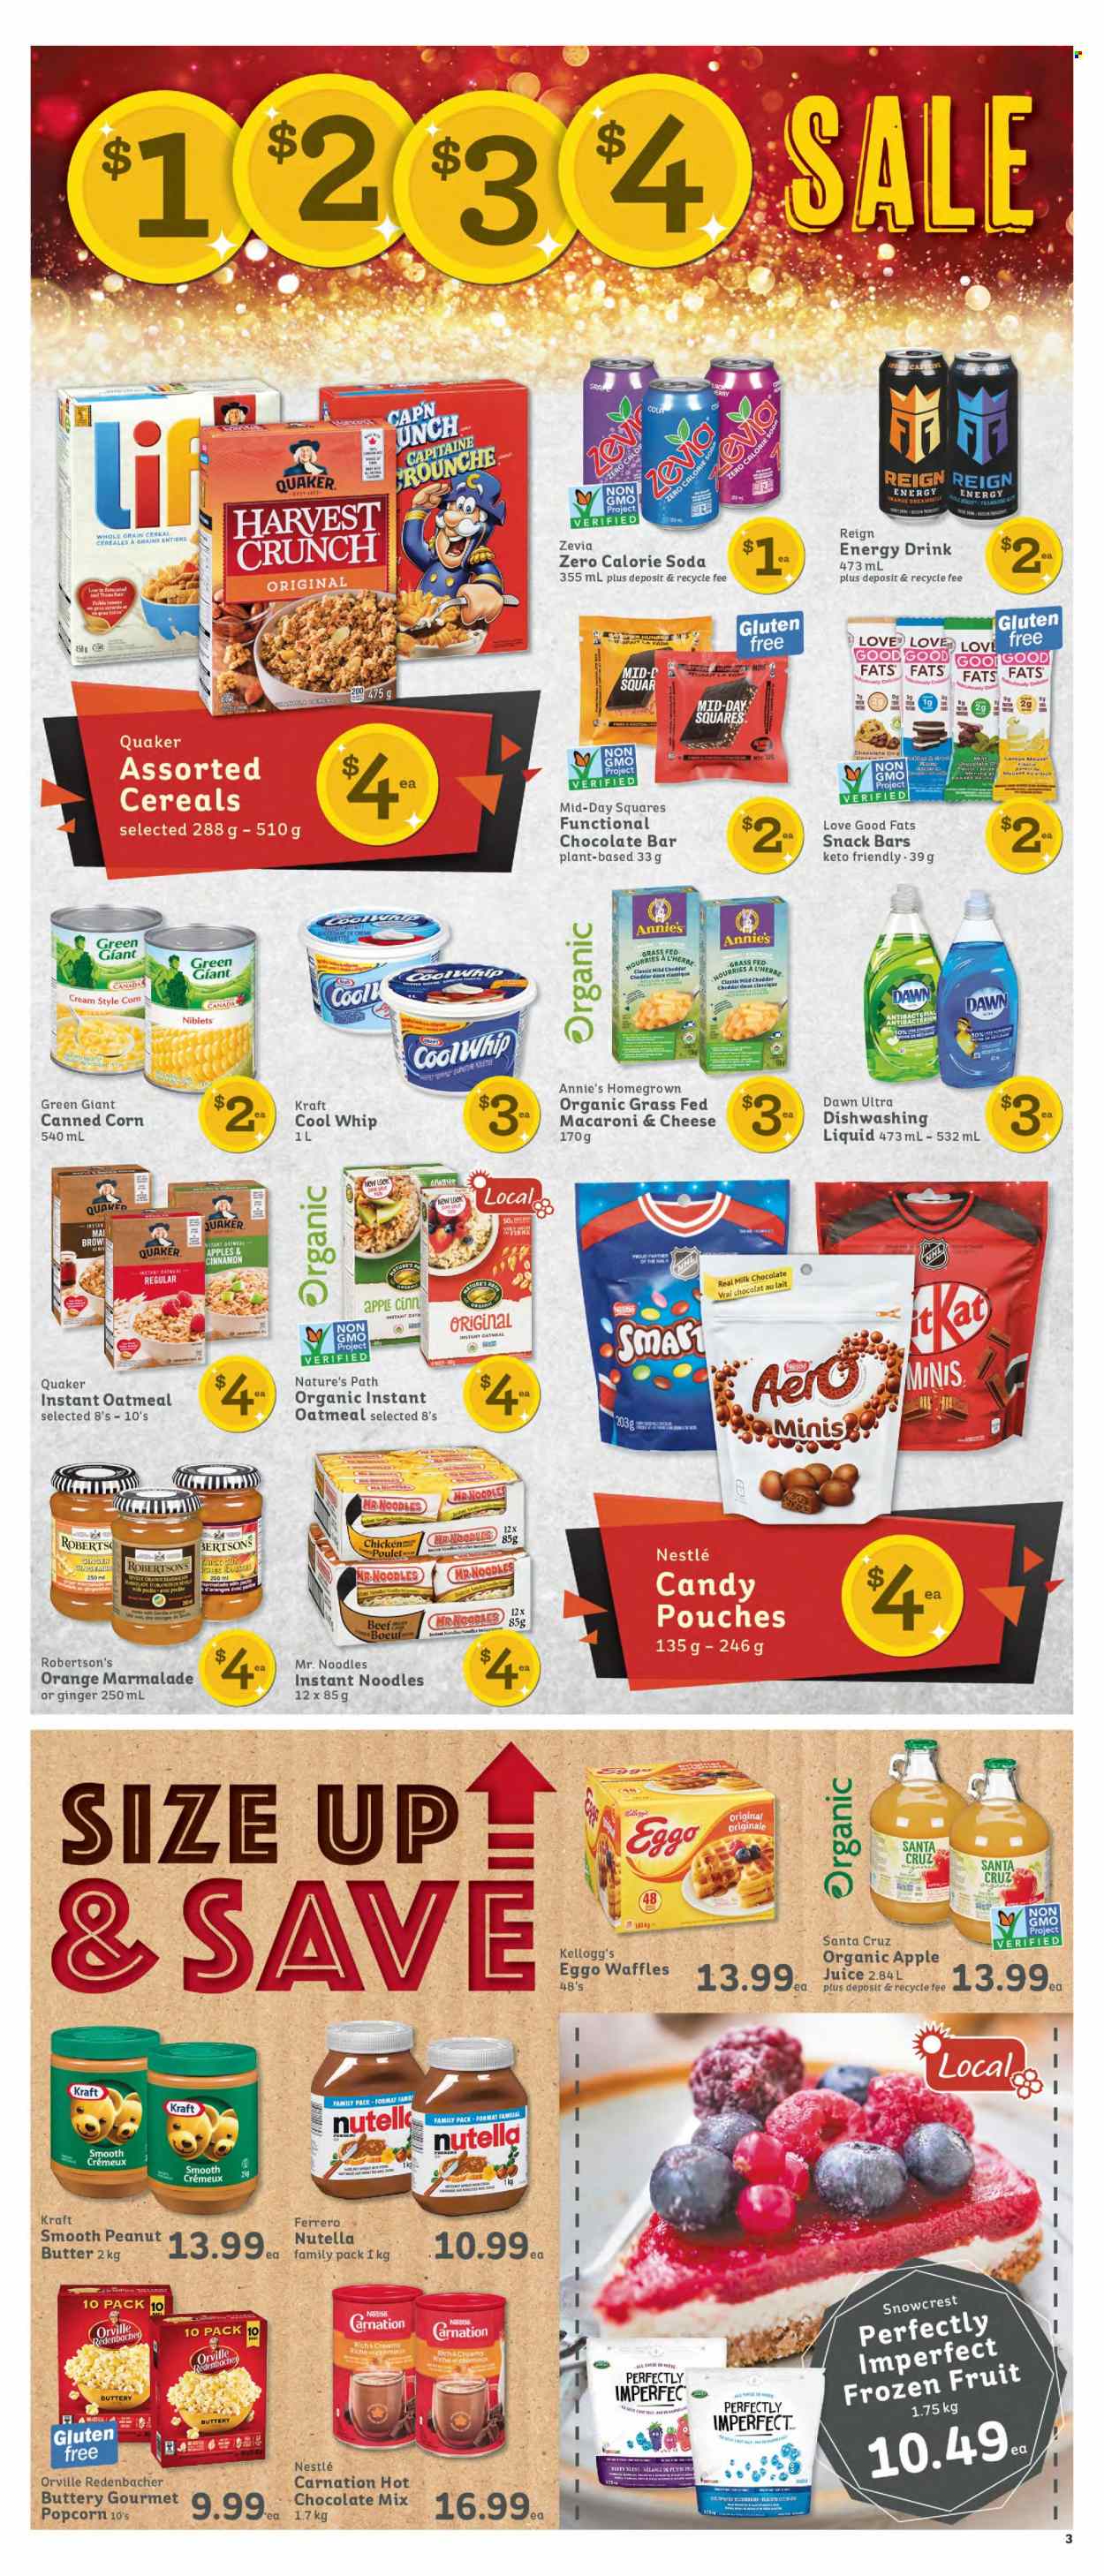 thumbnail - IGA Simple Goodness Flyer - November 25, 2022 - December 01, 2022 - Sales products - waffles, corn, ginger, blueberries, oranges, macaroni & cheese, instant noodles, Quaker, noodles, Annie's, Kraft®, mild cheddar, Cool Whip, milk chocolate, snack, Ego, snack bar, chocolate bar, popcorn, oatmeal, topping, cereals, cinnamon, energy drink, soda, hot chocolate, Dell, granola, Nestlé, Nutella, Ferrero Rocher. Page 3.